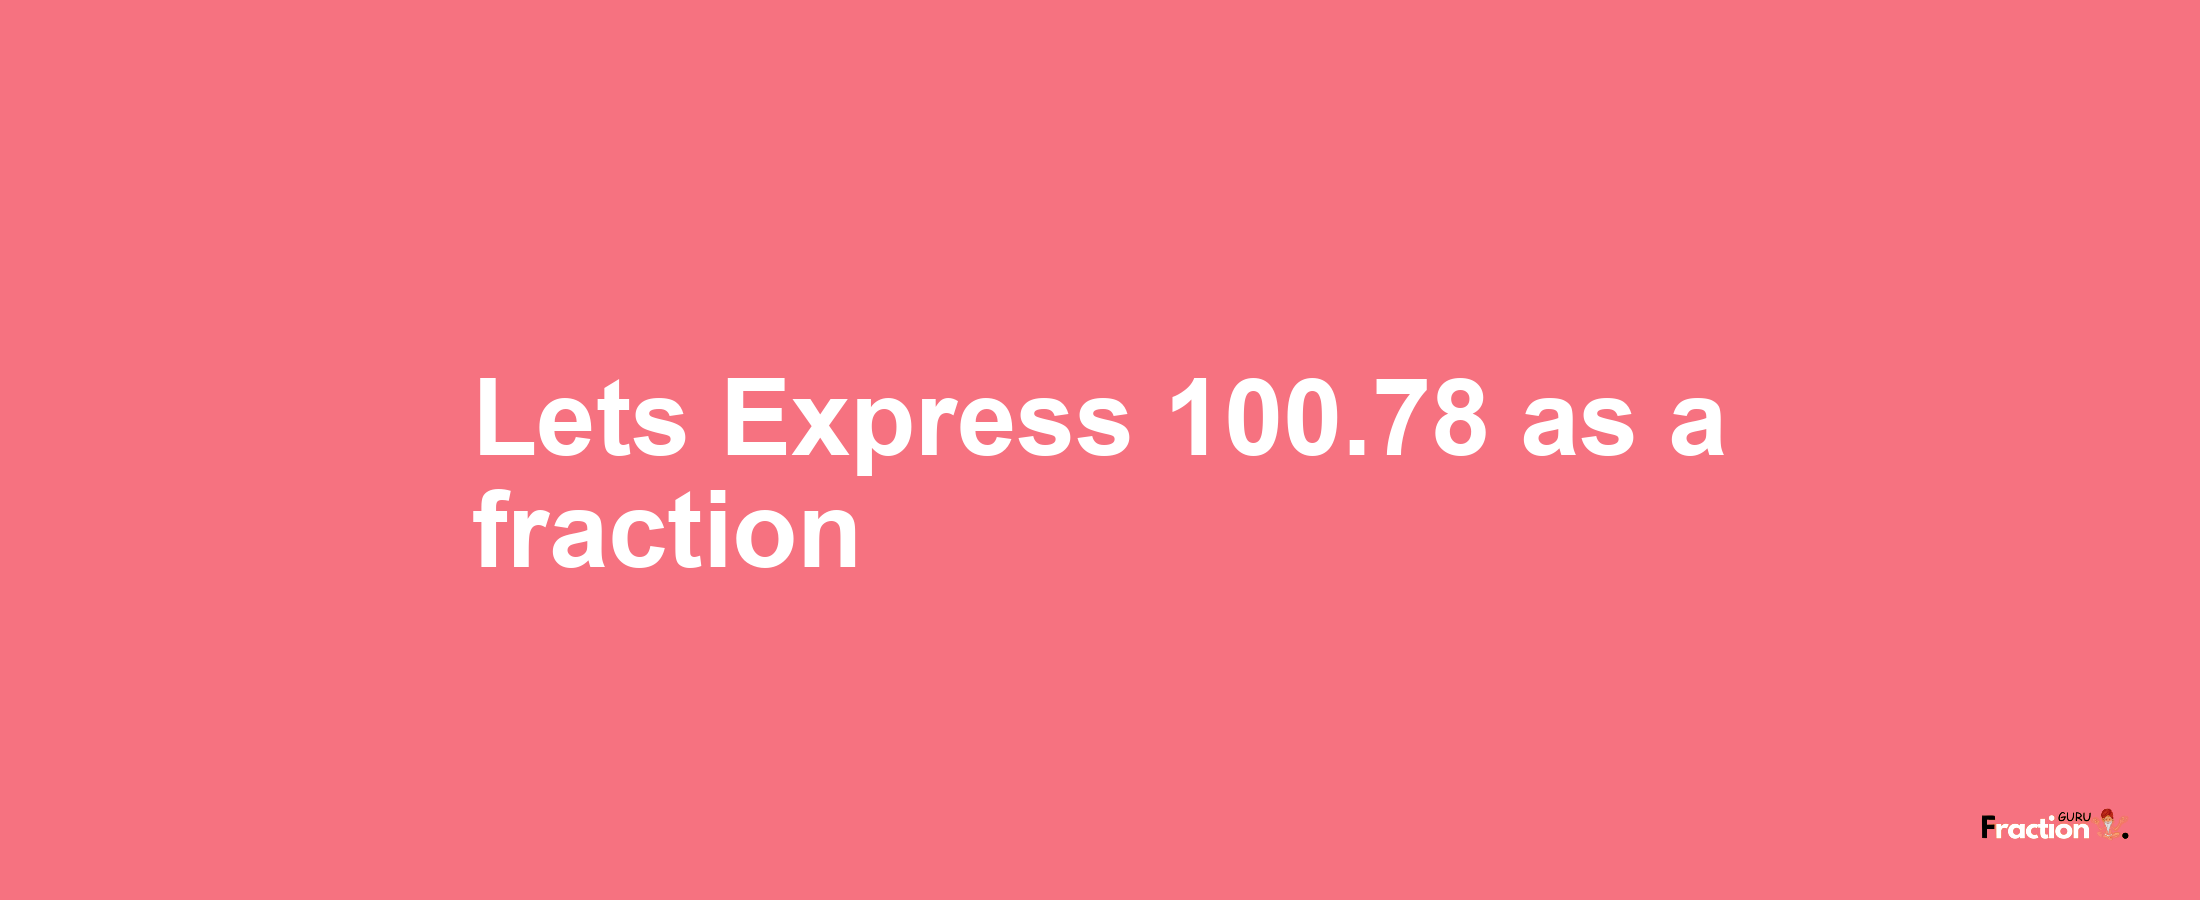 Lets Express 100.78 as afraction